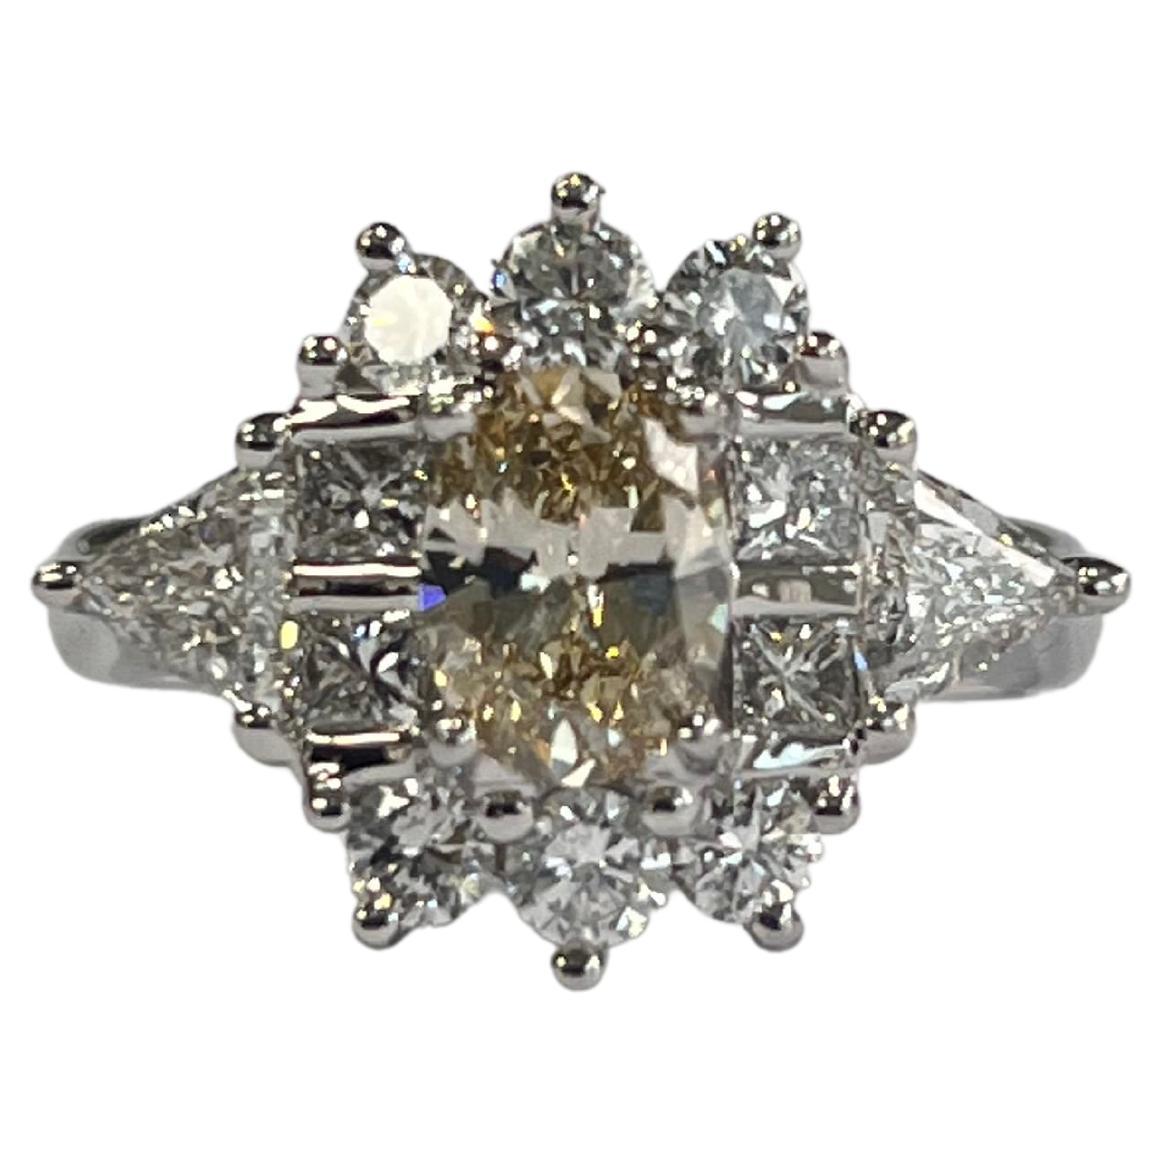 A very gorgeous and wearable Diamond Engagement Ring set in Platinum 900. The weight of the centre Fancy Light Brownish Yellow Diamond is 0.79 carats. Other Diamonds weight is 1.22 carats. Net Platinum weight is 8.50 grams. The dimensions of the